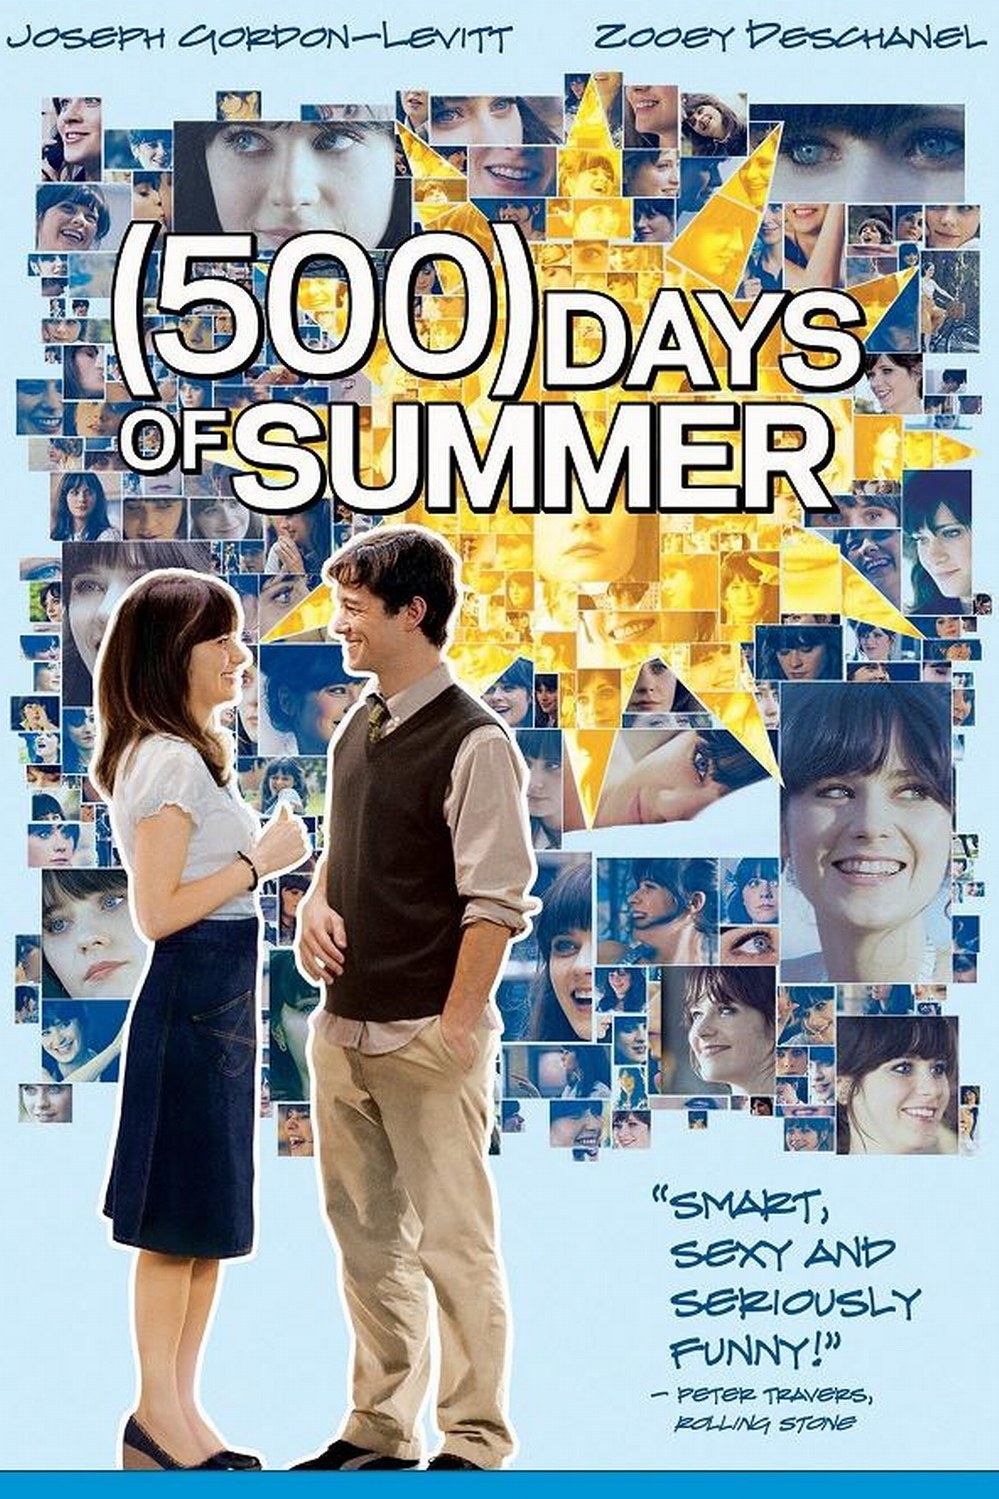 (500) Days of Summer movies in France